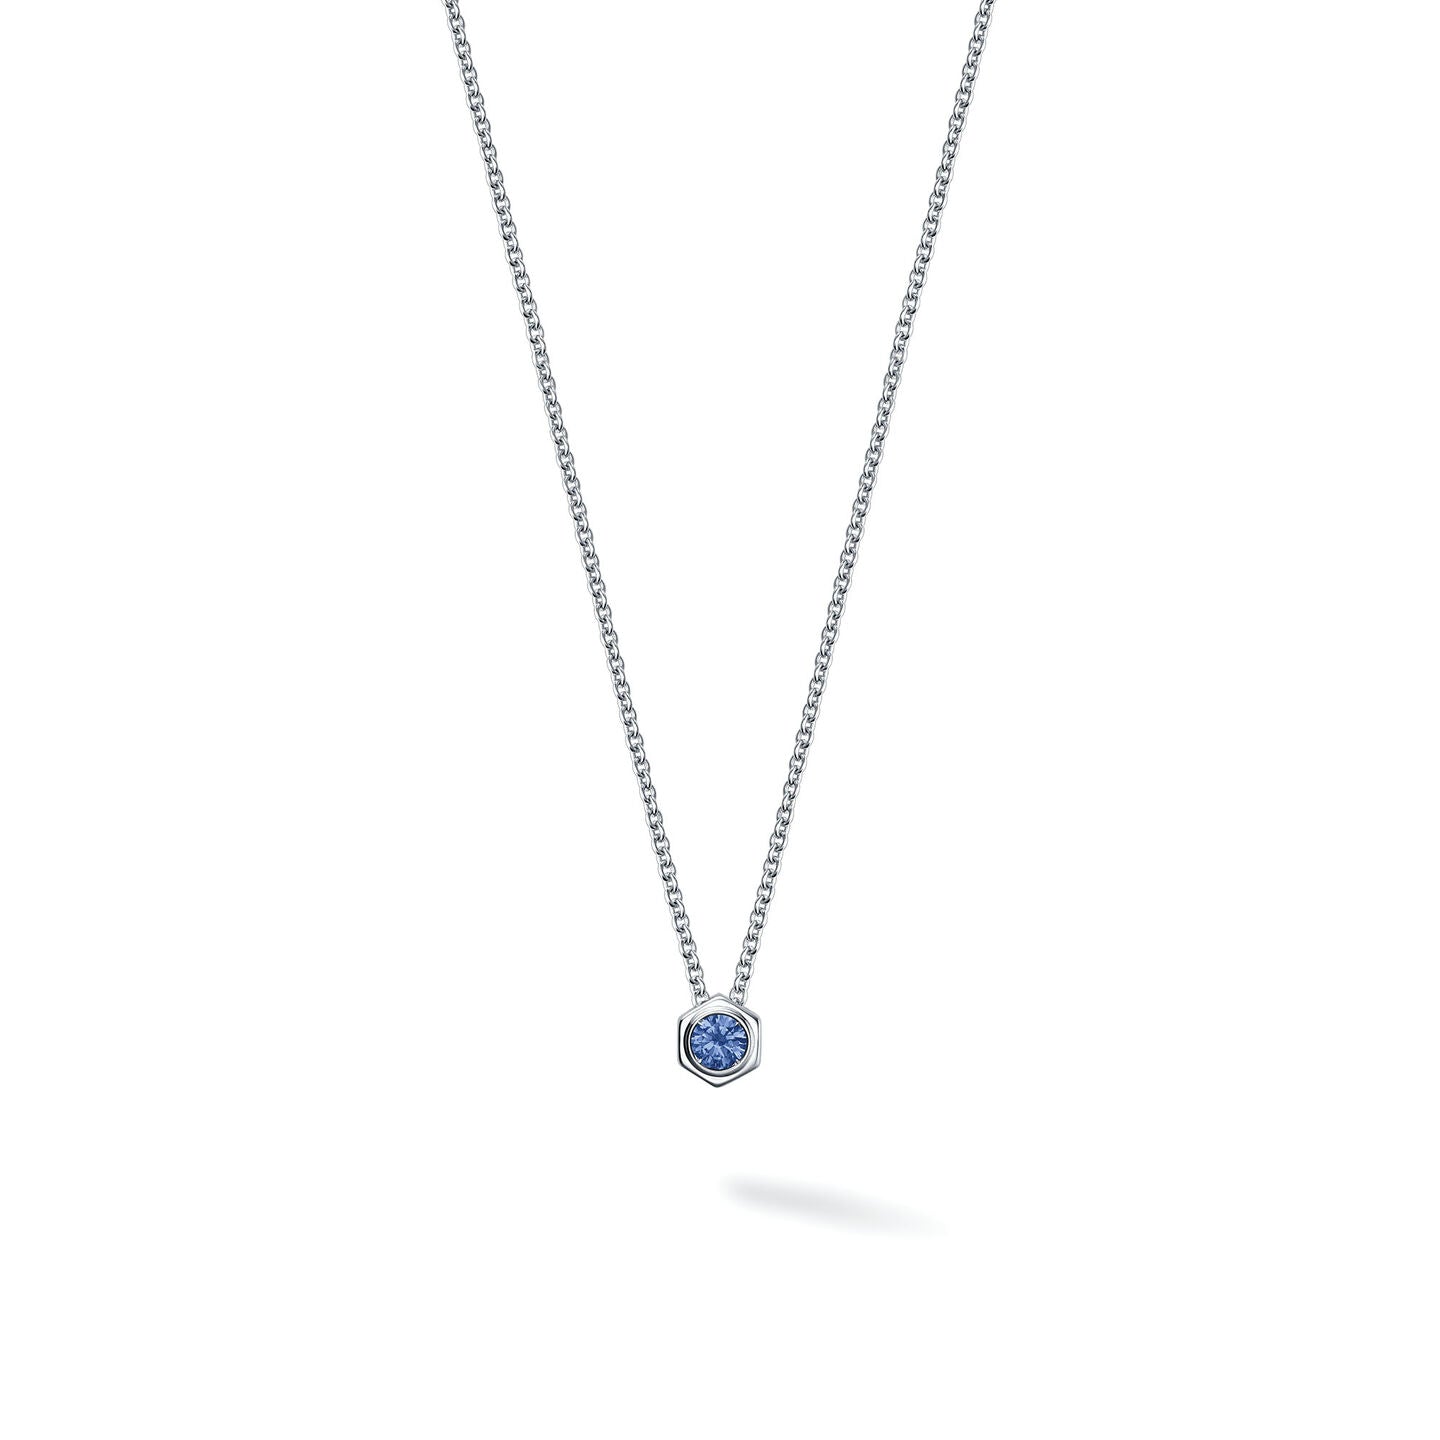 Birks Bee Chic Sapphire and Silver Necklace